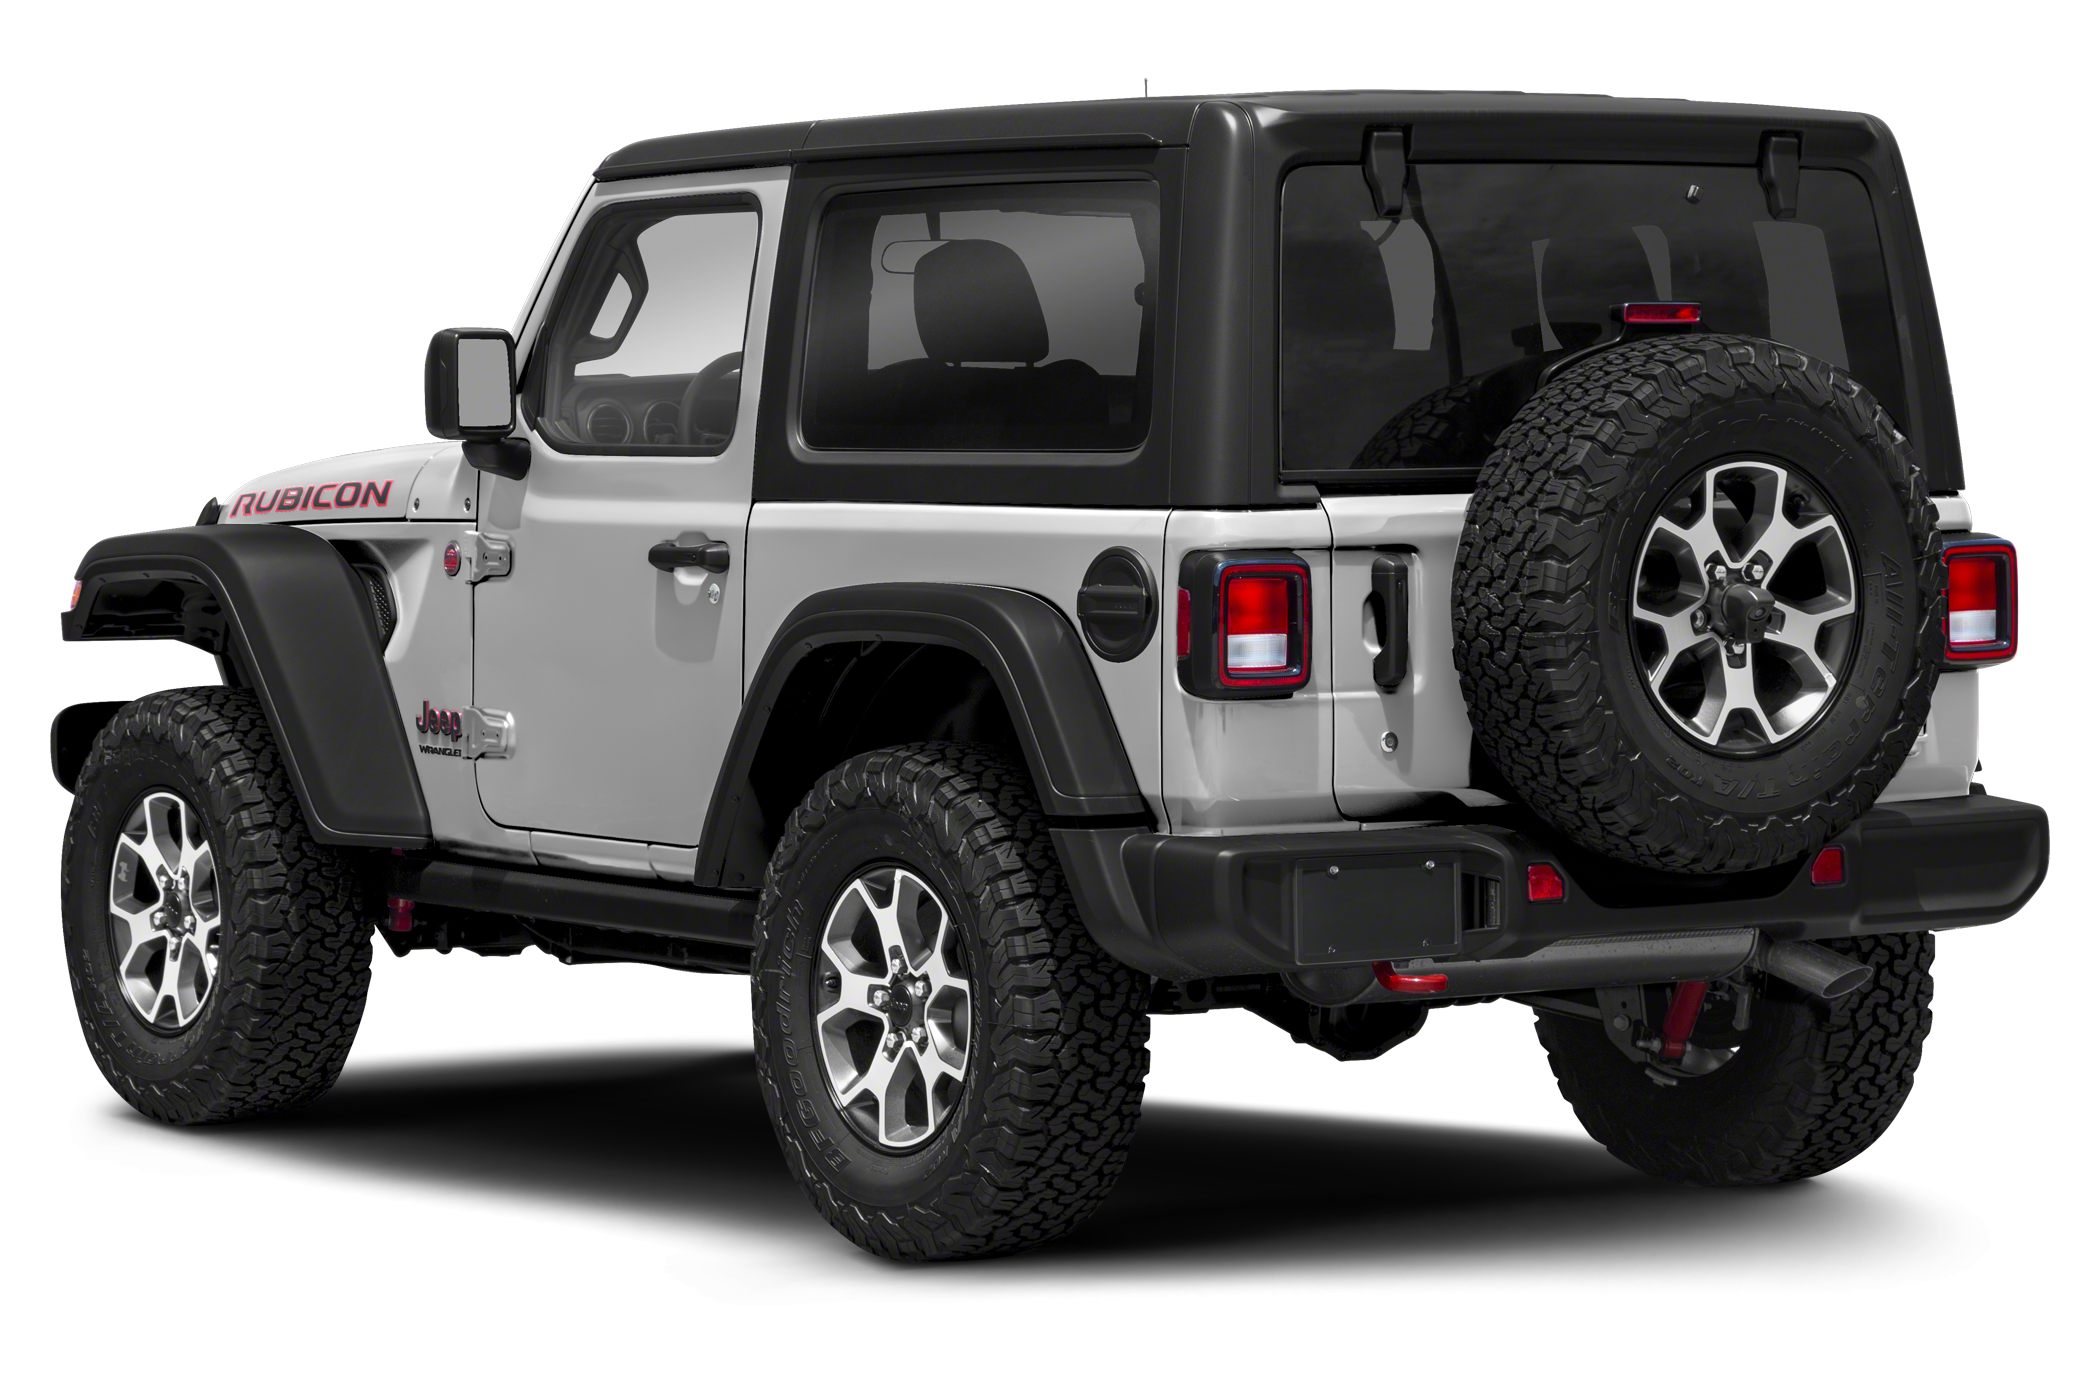 Jeep Wrangler Rubicon 2dr 4x4 Pricing And Options